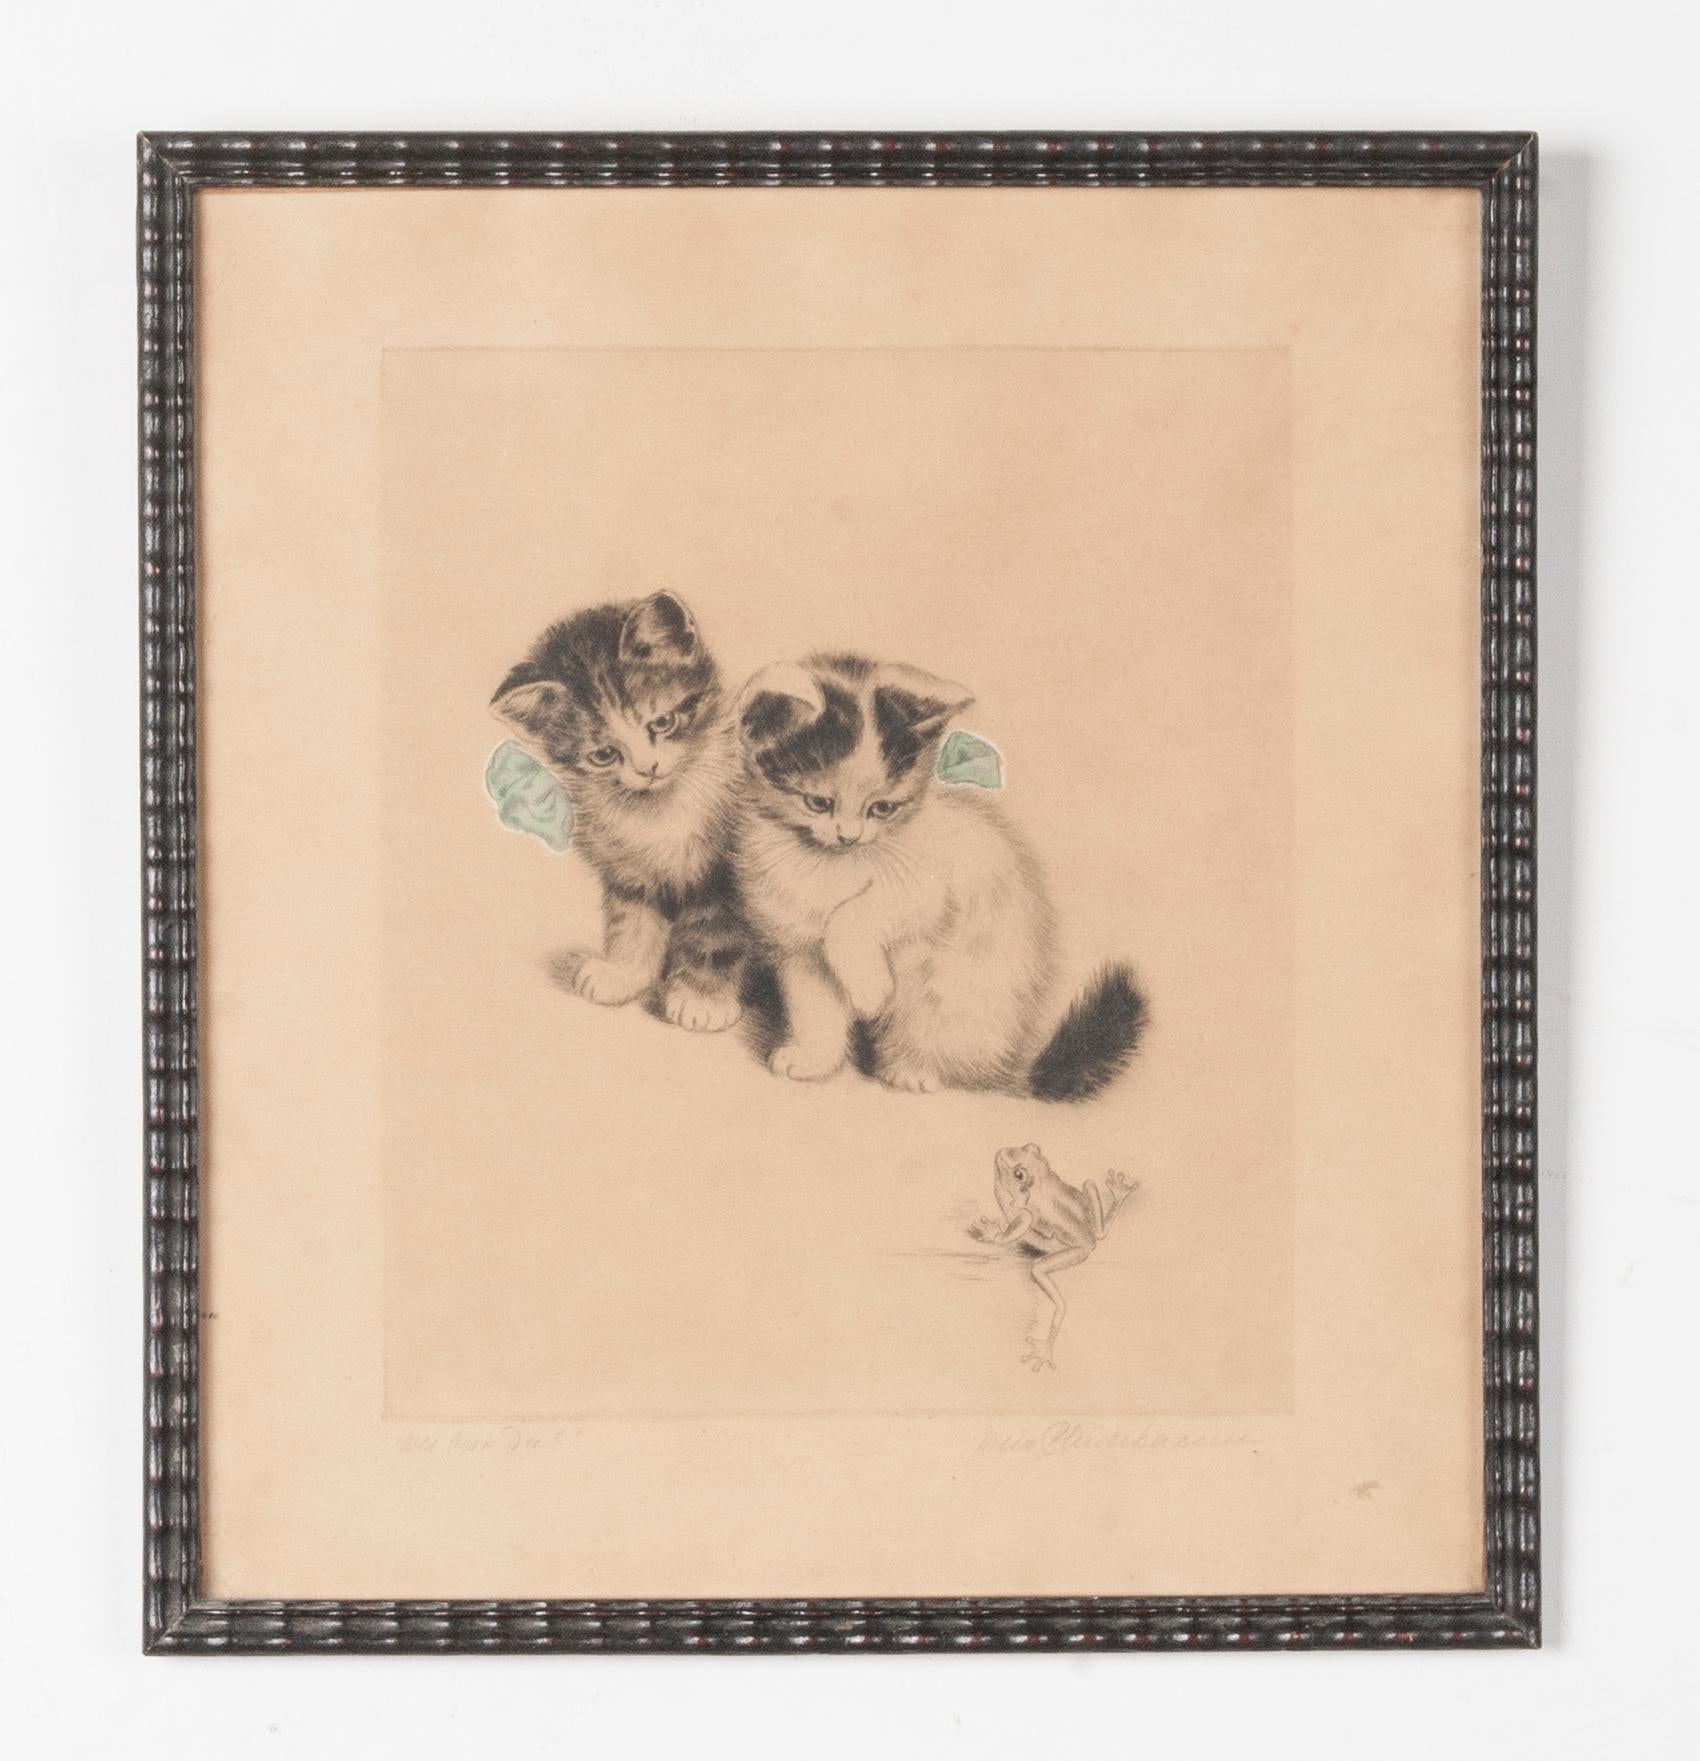 A cute lithograph of two kittens accompanied by a frog. Signed below with pencil by the artist: Meta Plückebaum. On the left the title 